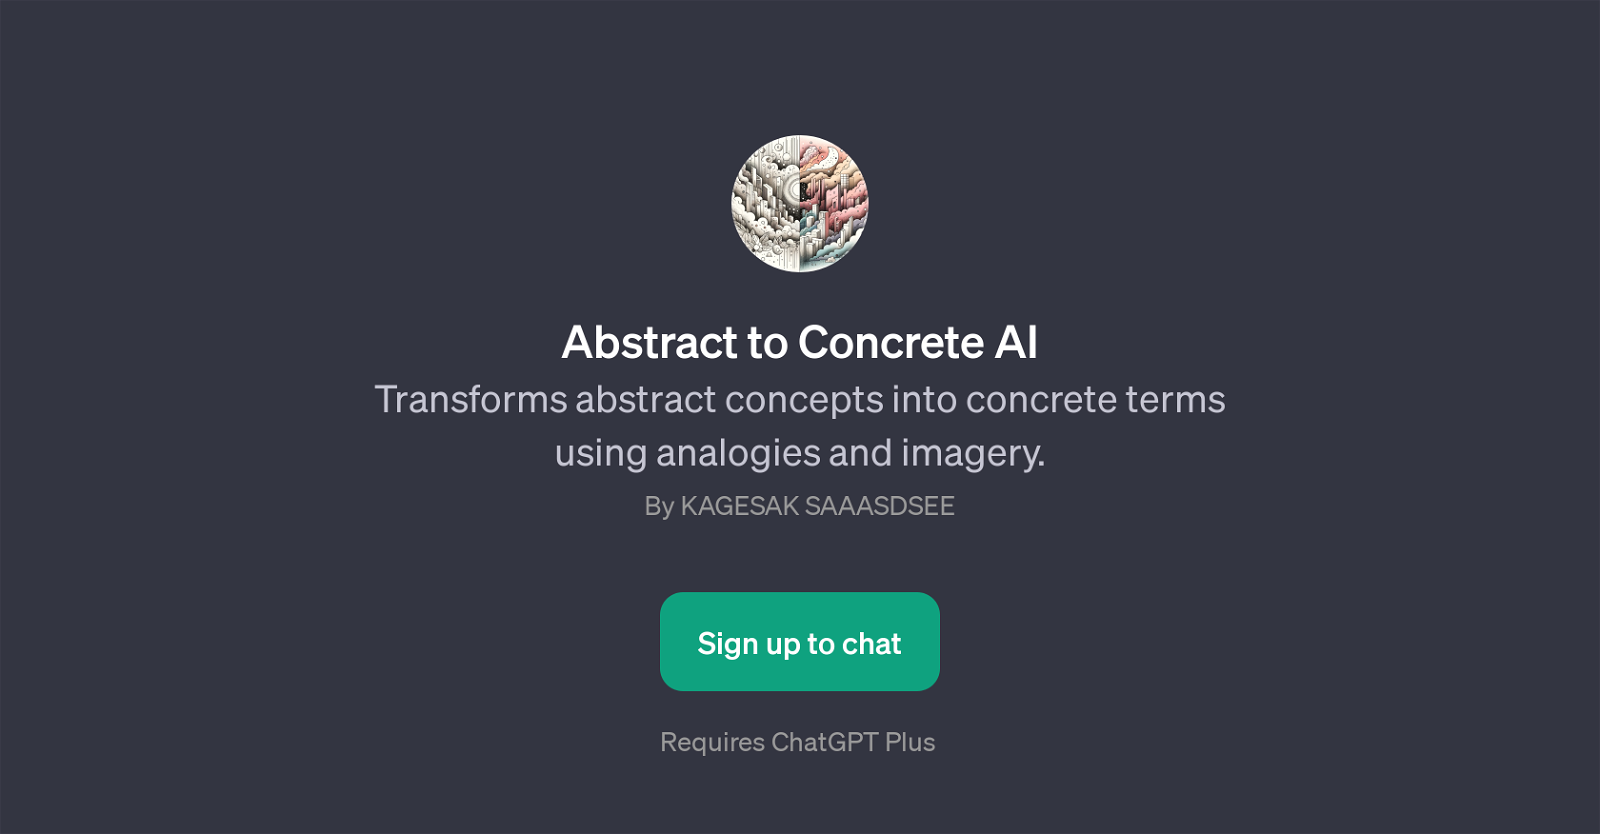 Abstract to Concrete AI website